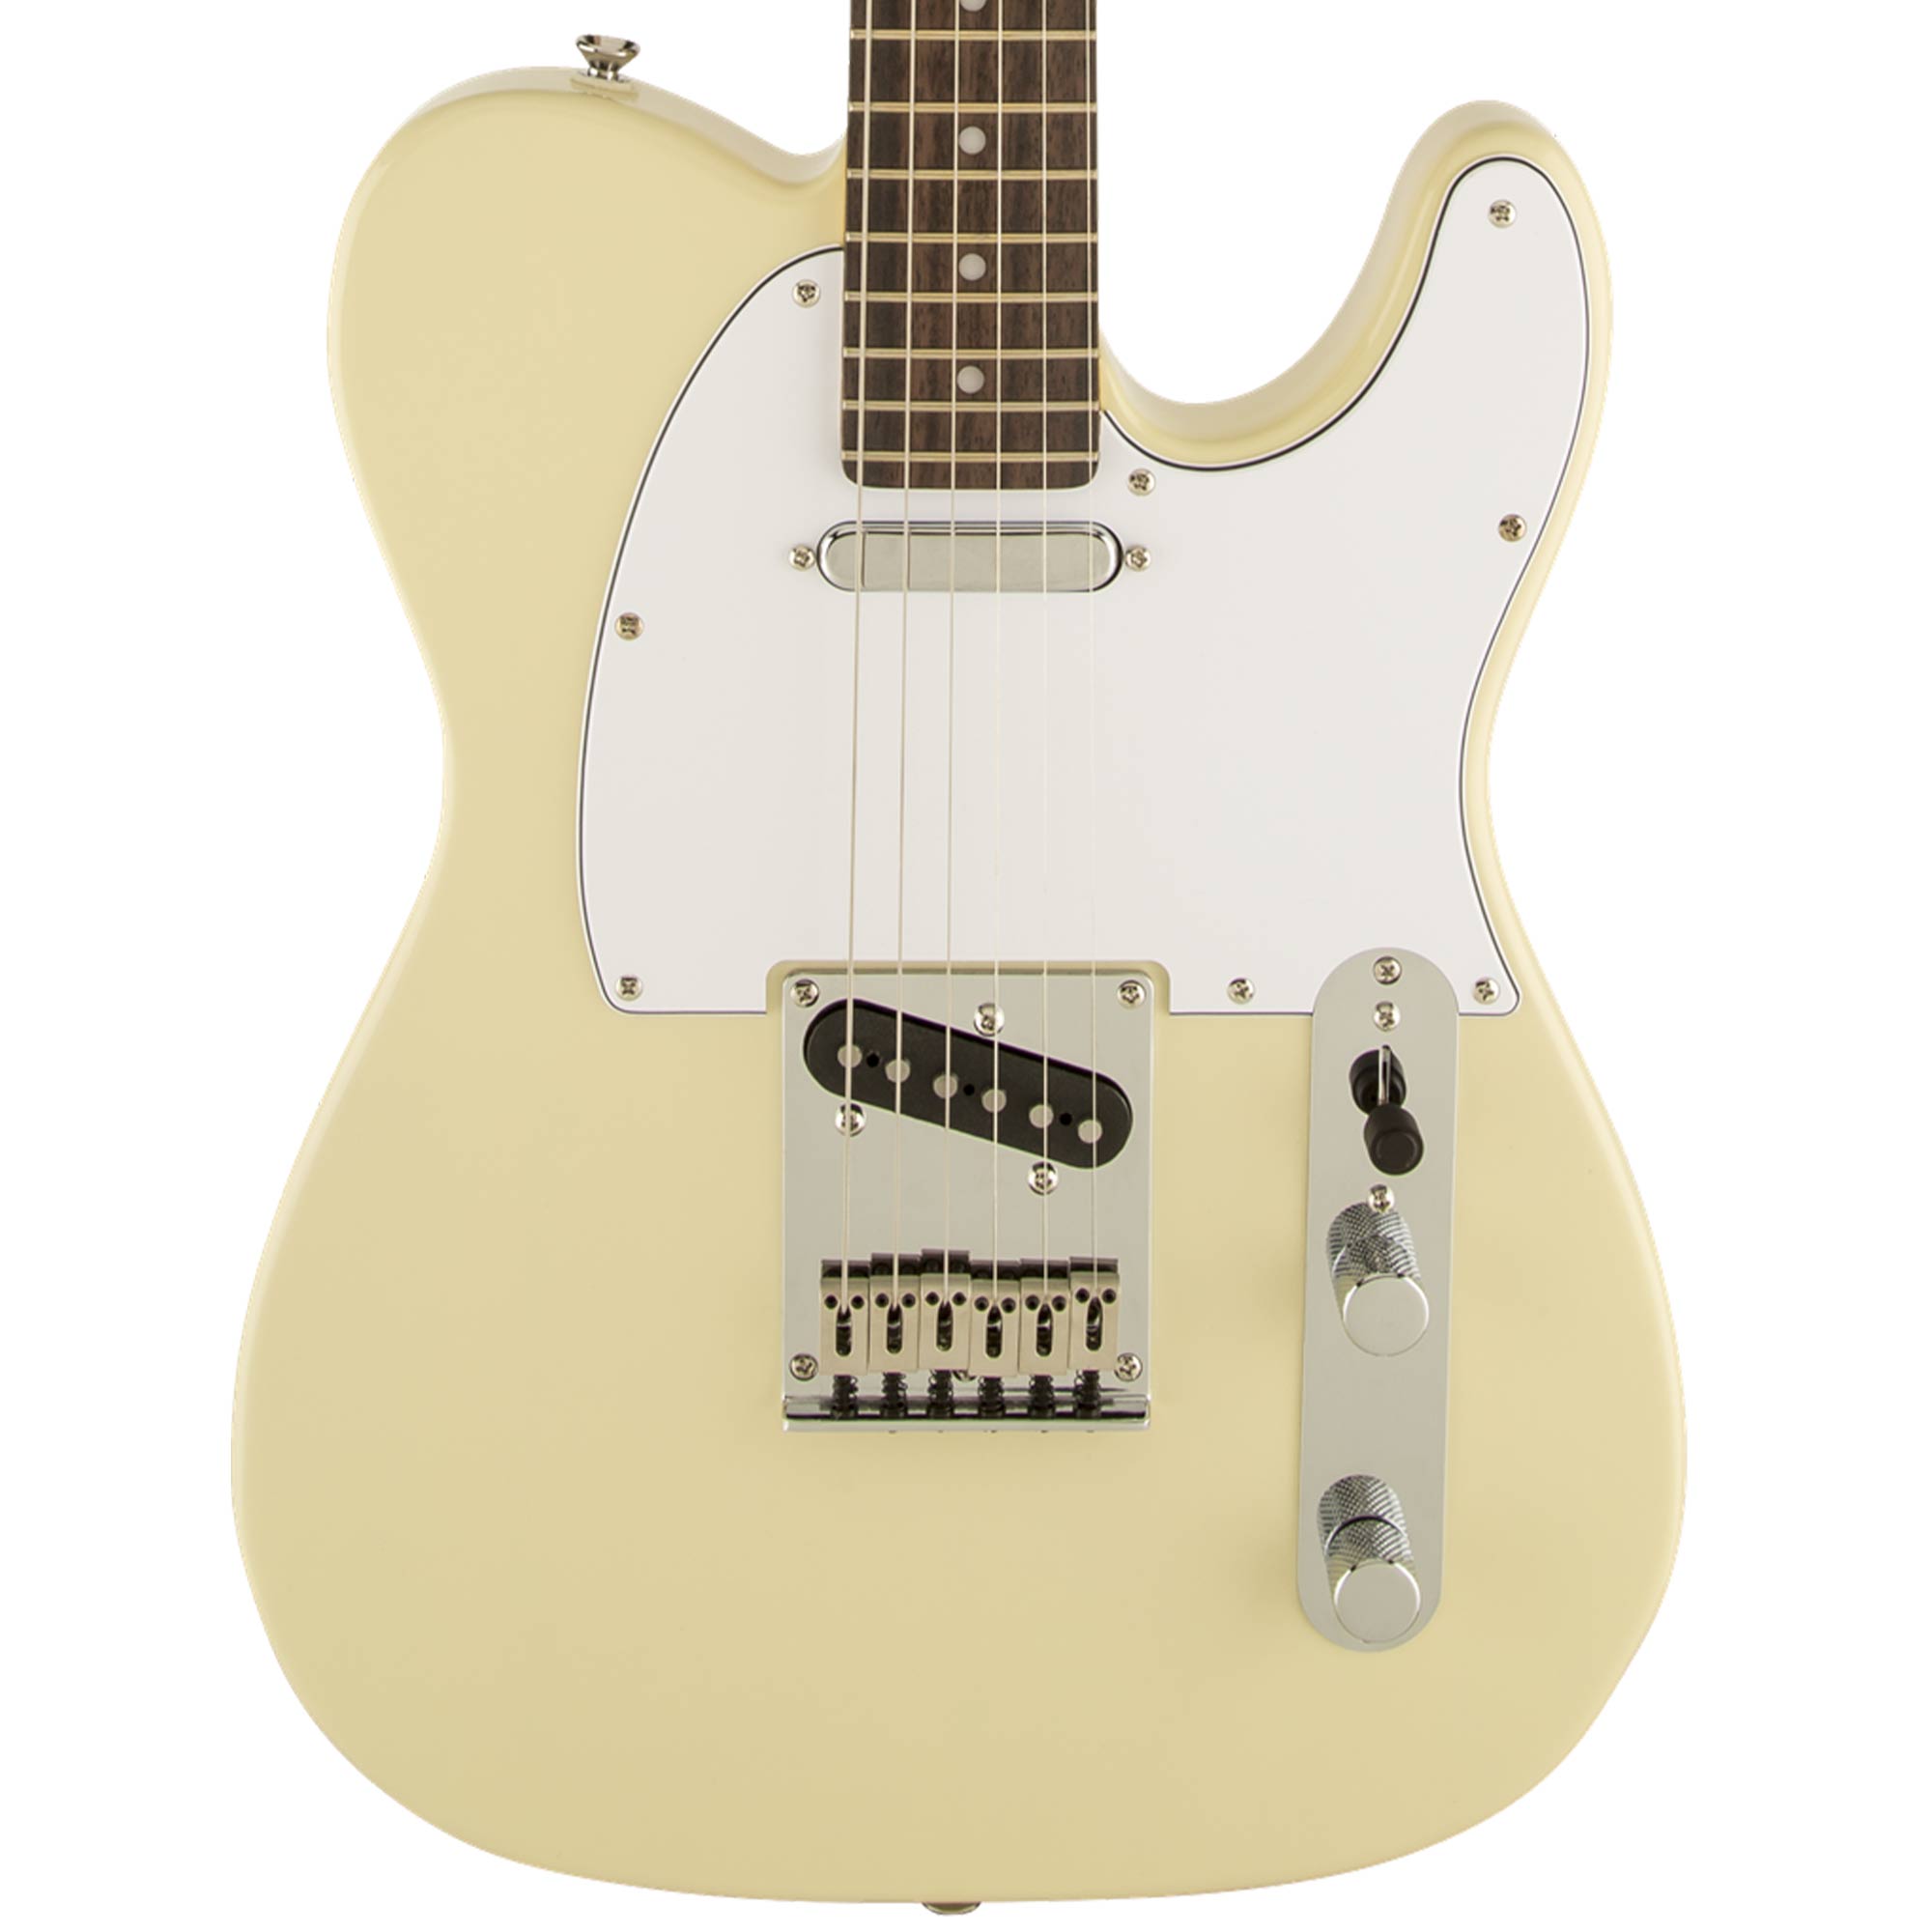 Squier Standard Telecaster Vintage Blonde Used | The Music Zoo